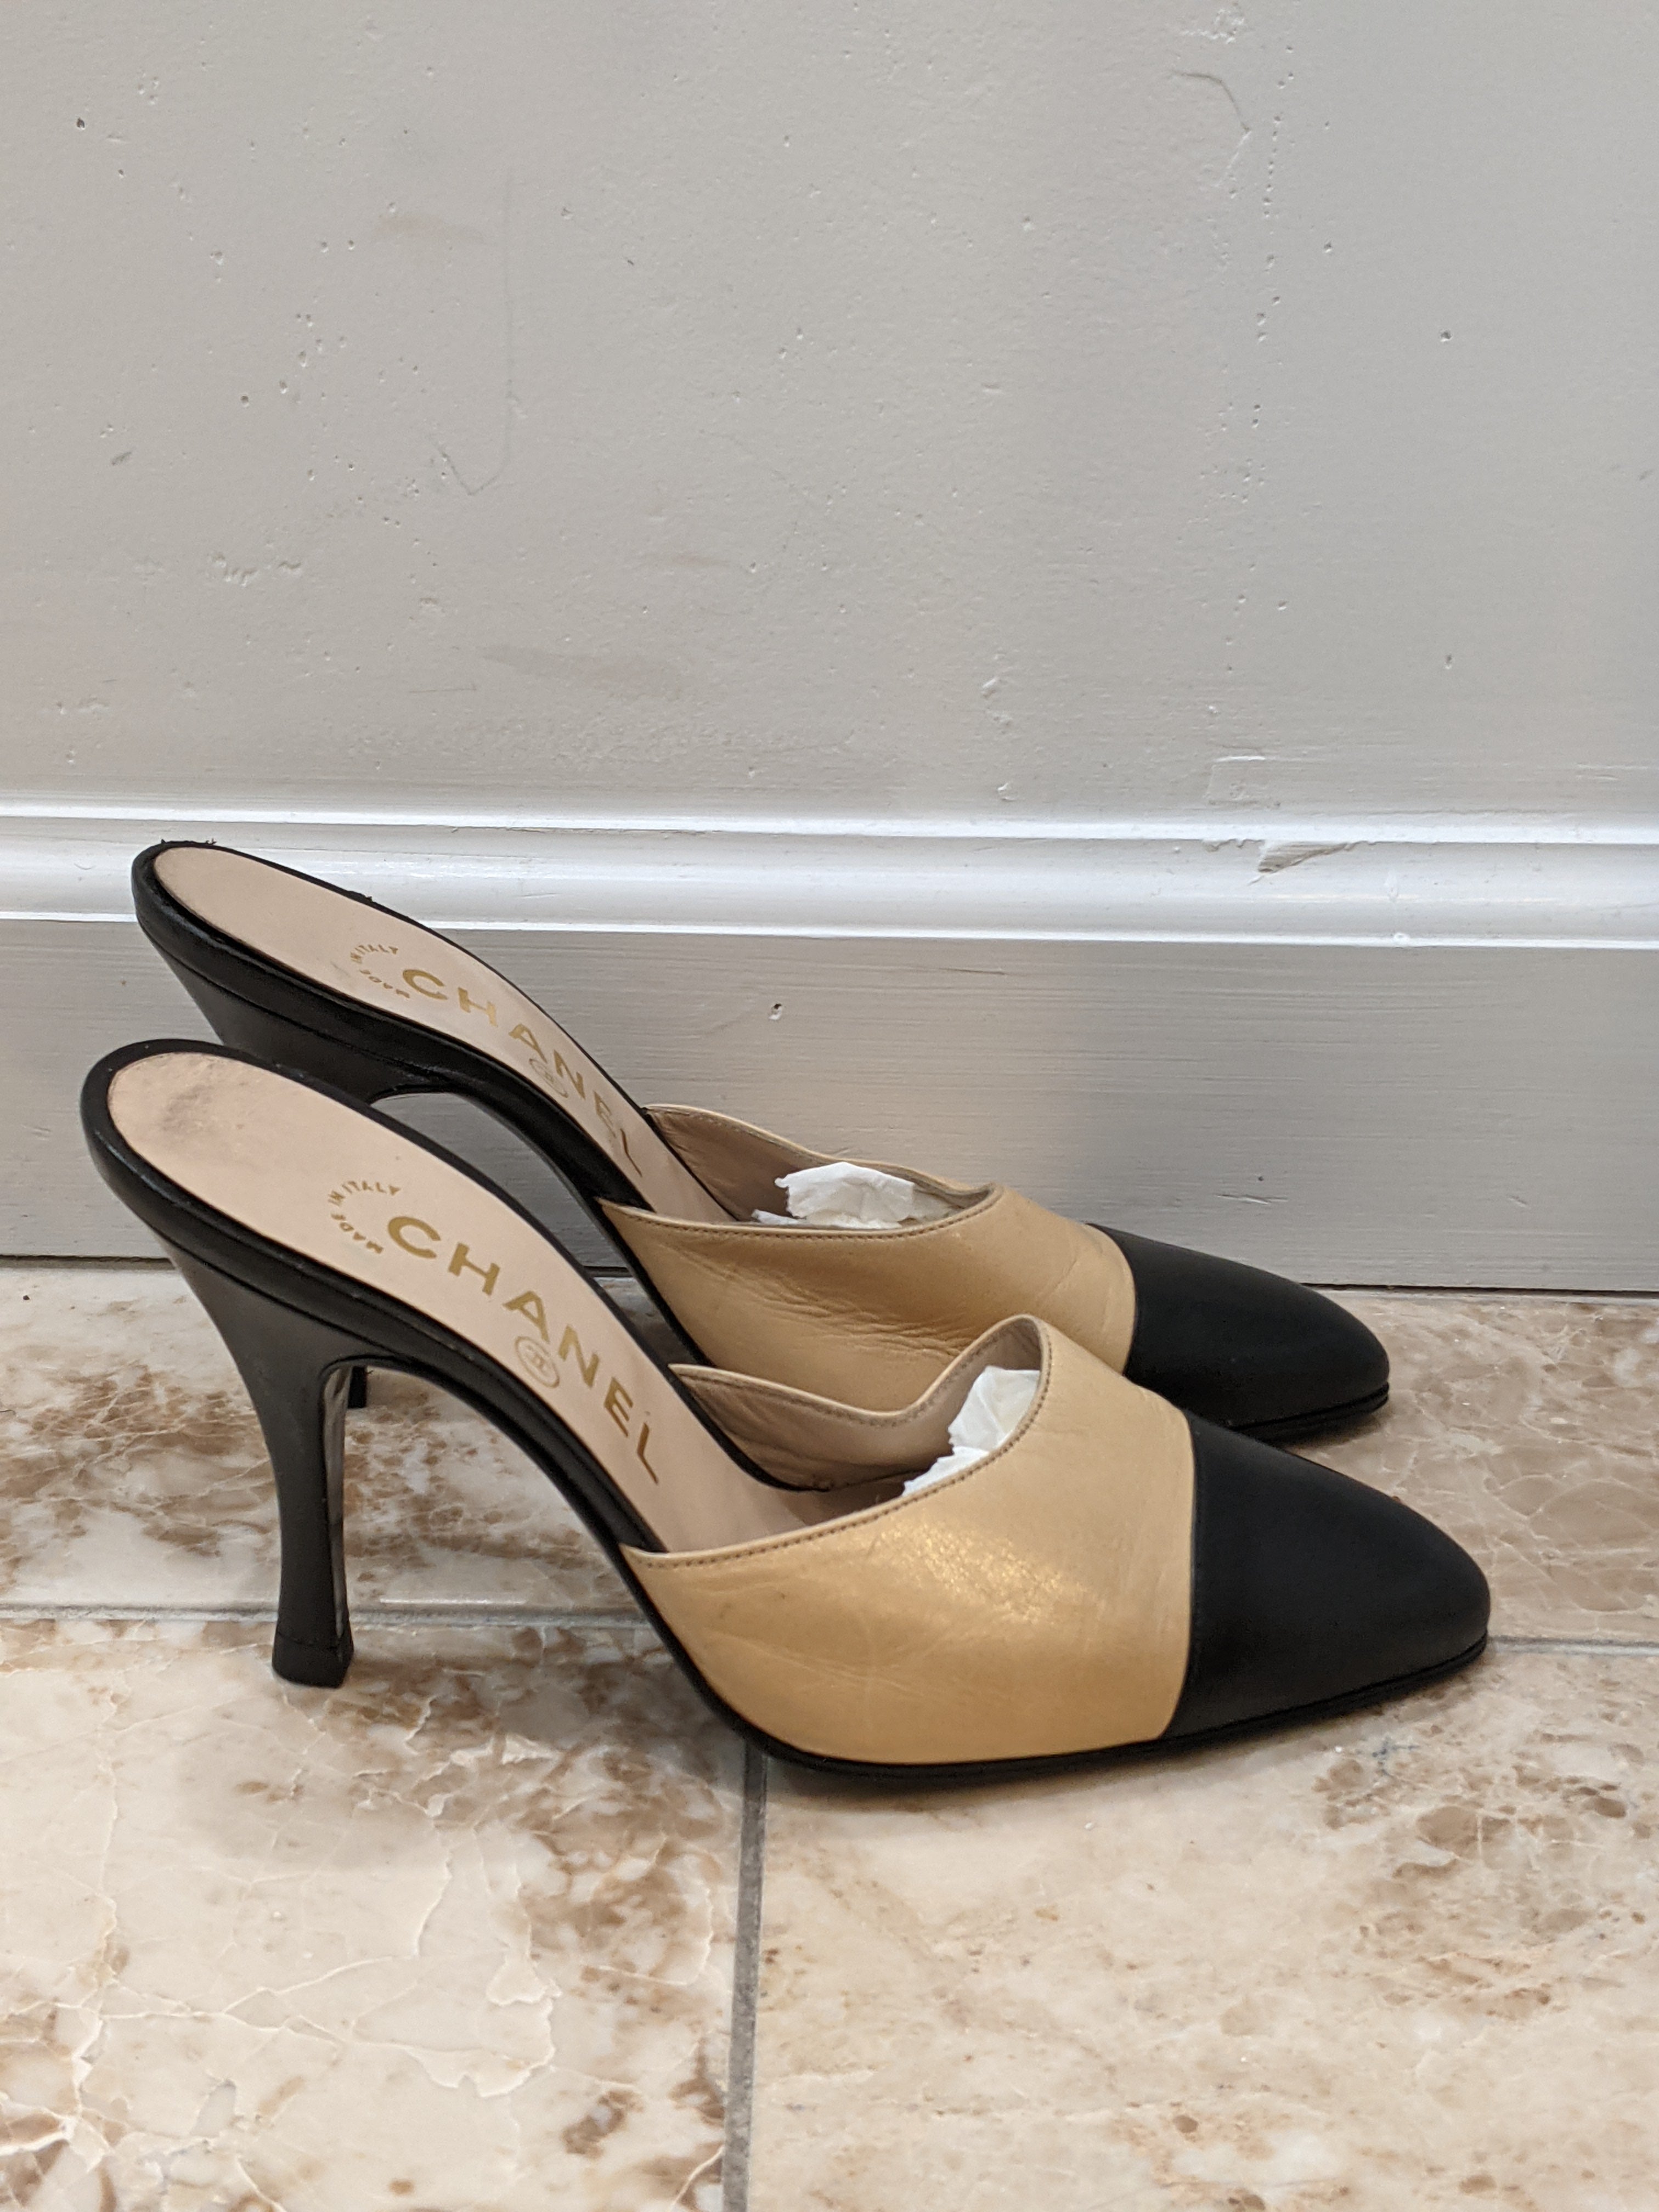 Vintage Beige And Black Leather Mules By Chanel | Shop THRILLING